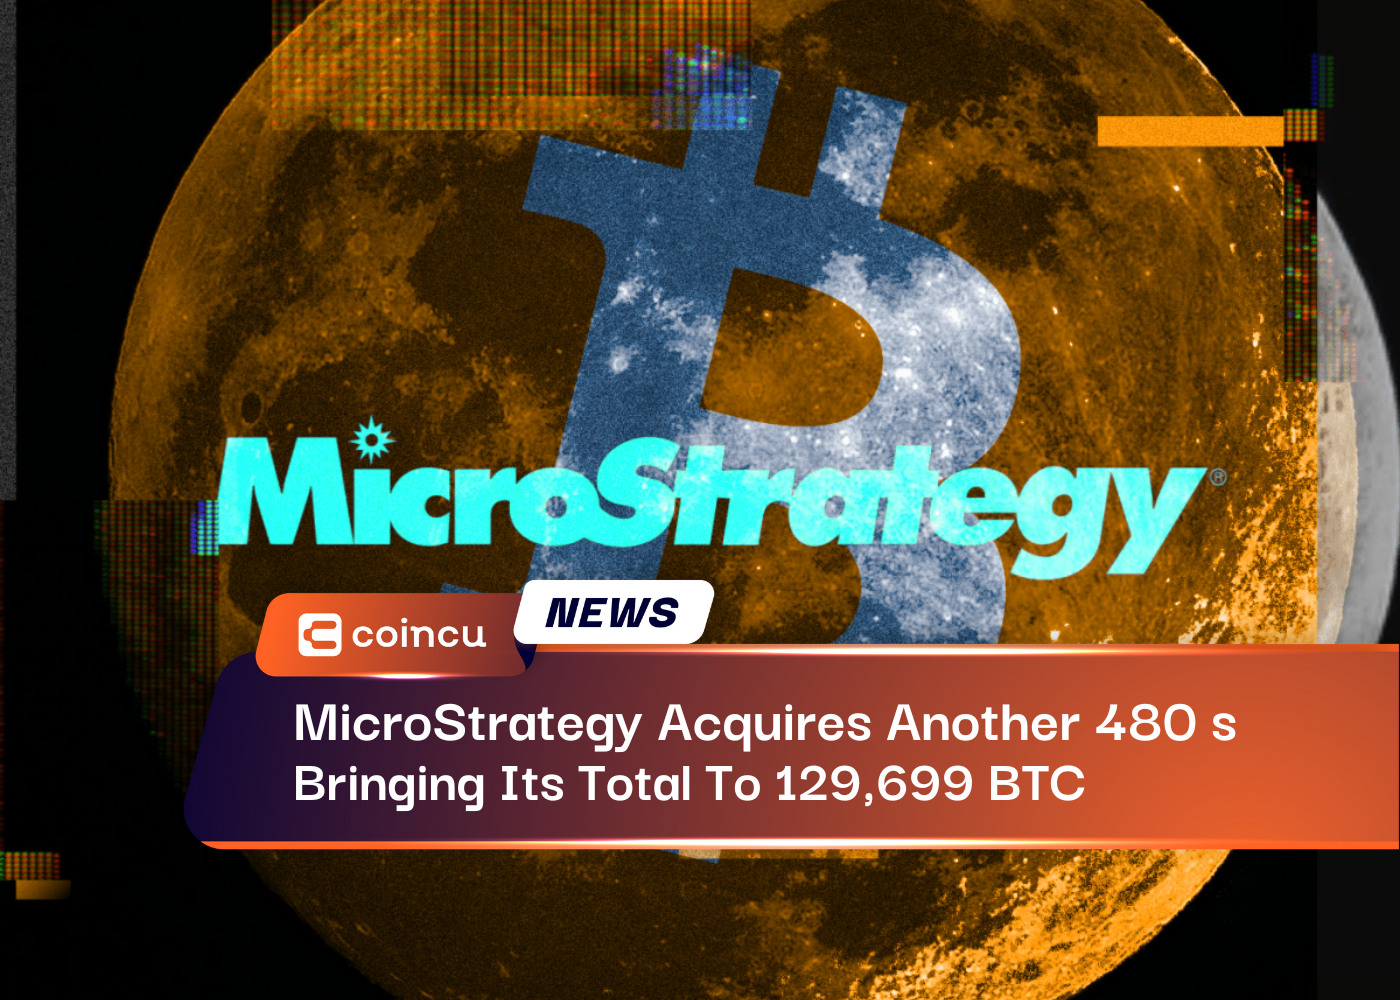 MicroStrategy Acquires Another 480 s